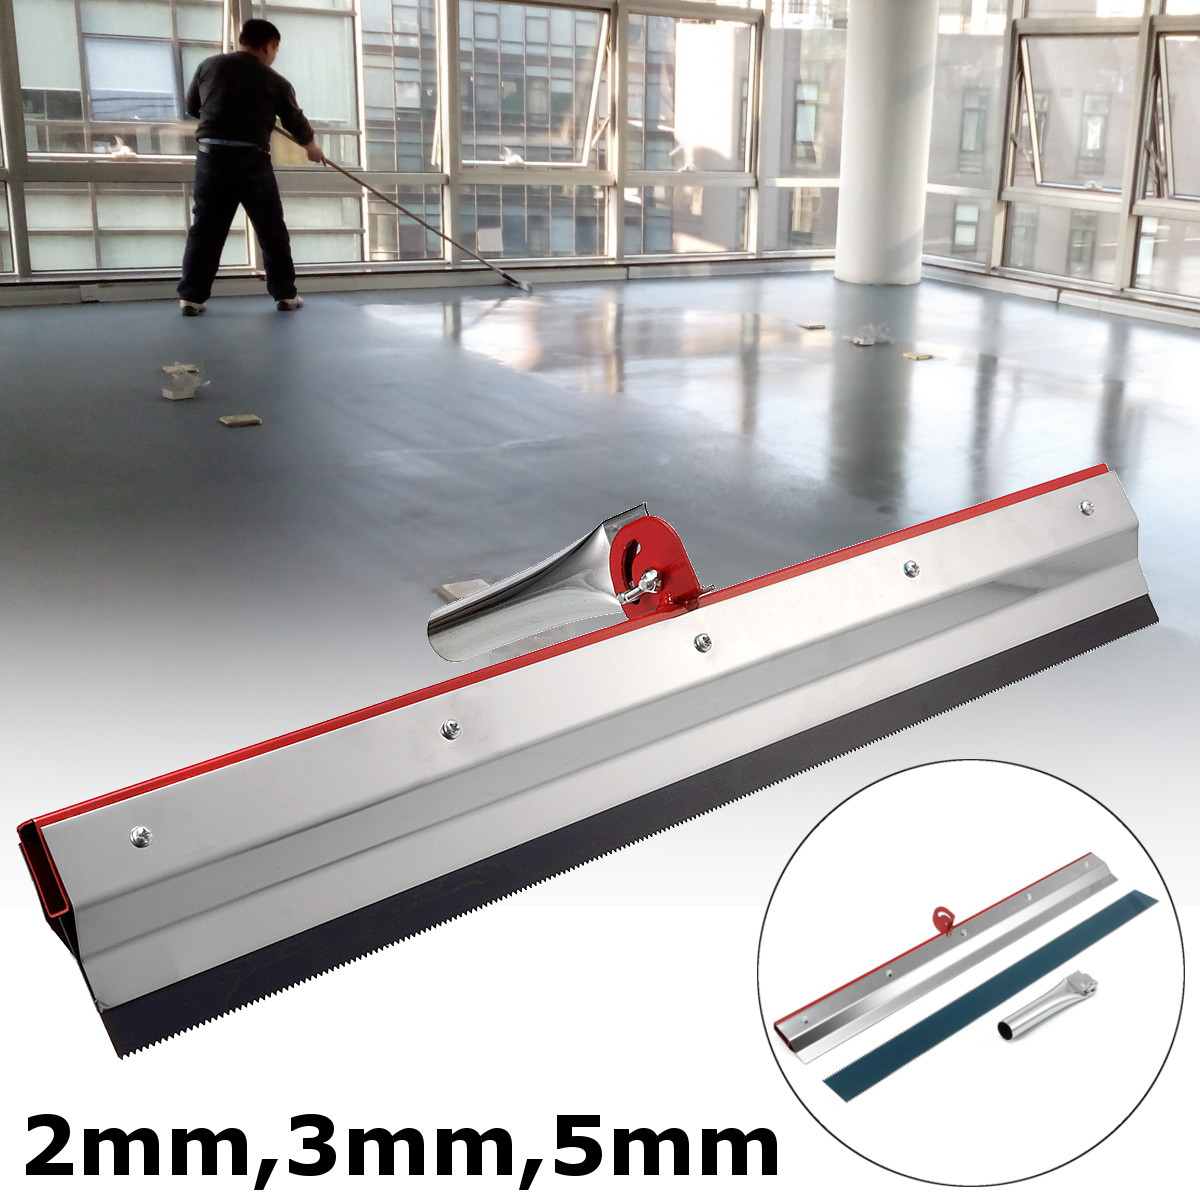 Notched-Squeegee-Epoxy-Cement-Painting-Coating-Self-Leveling-Flooring-Gear-Rake-2-3-5mm-Tools-Kit-1321289